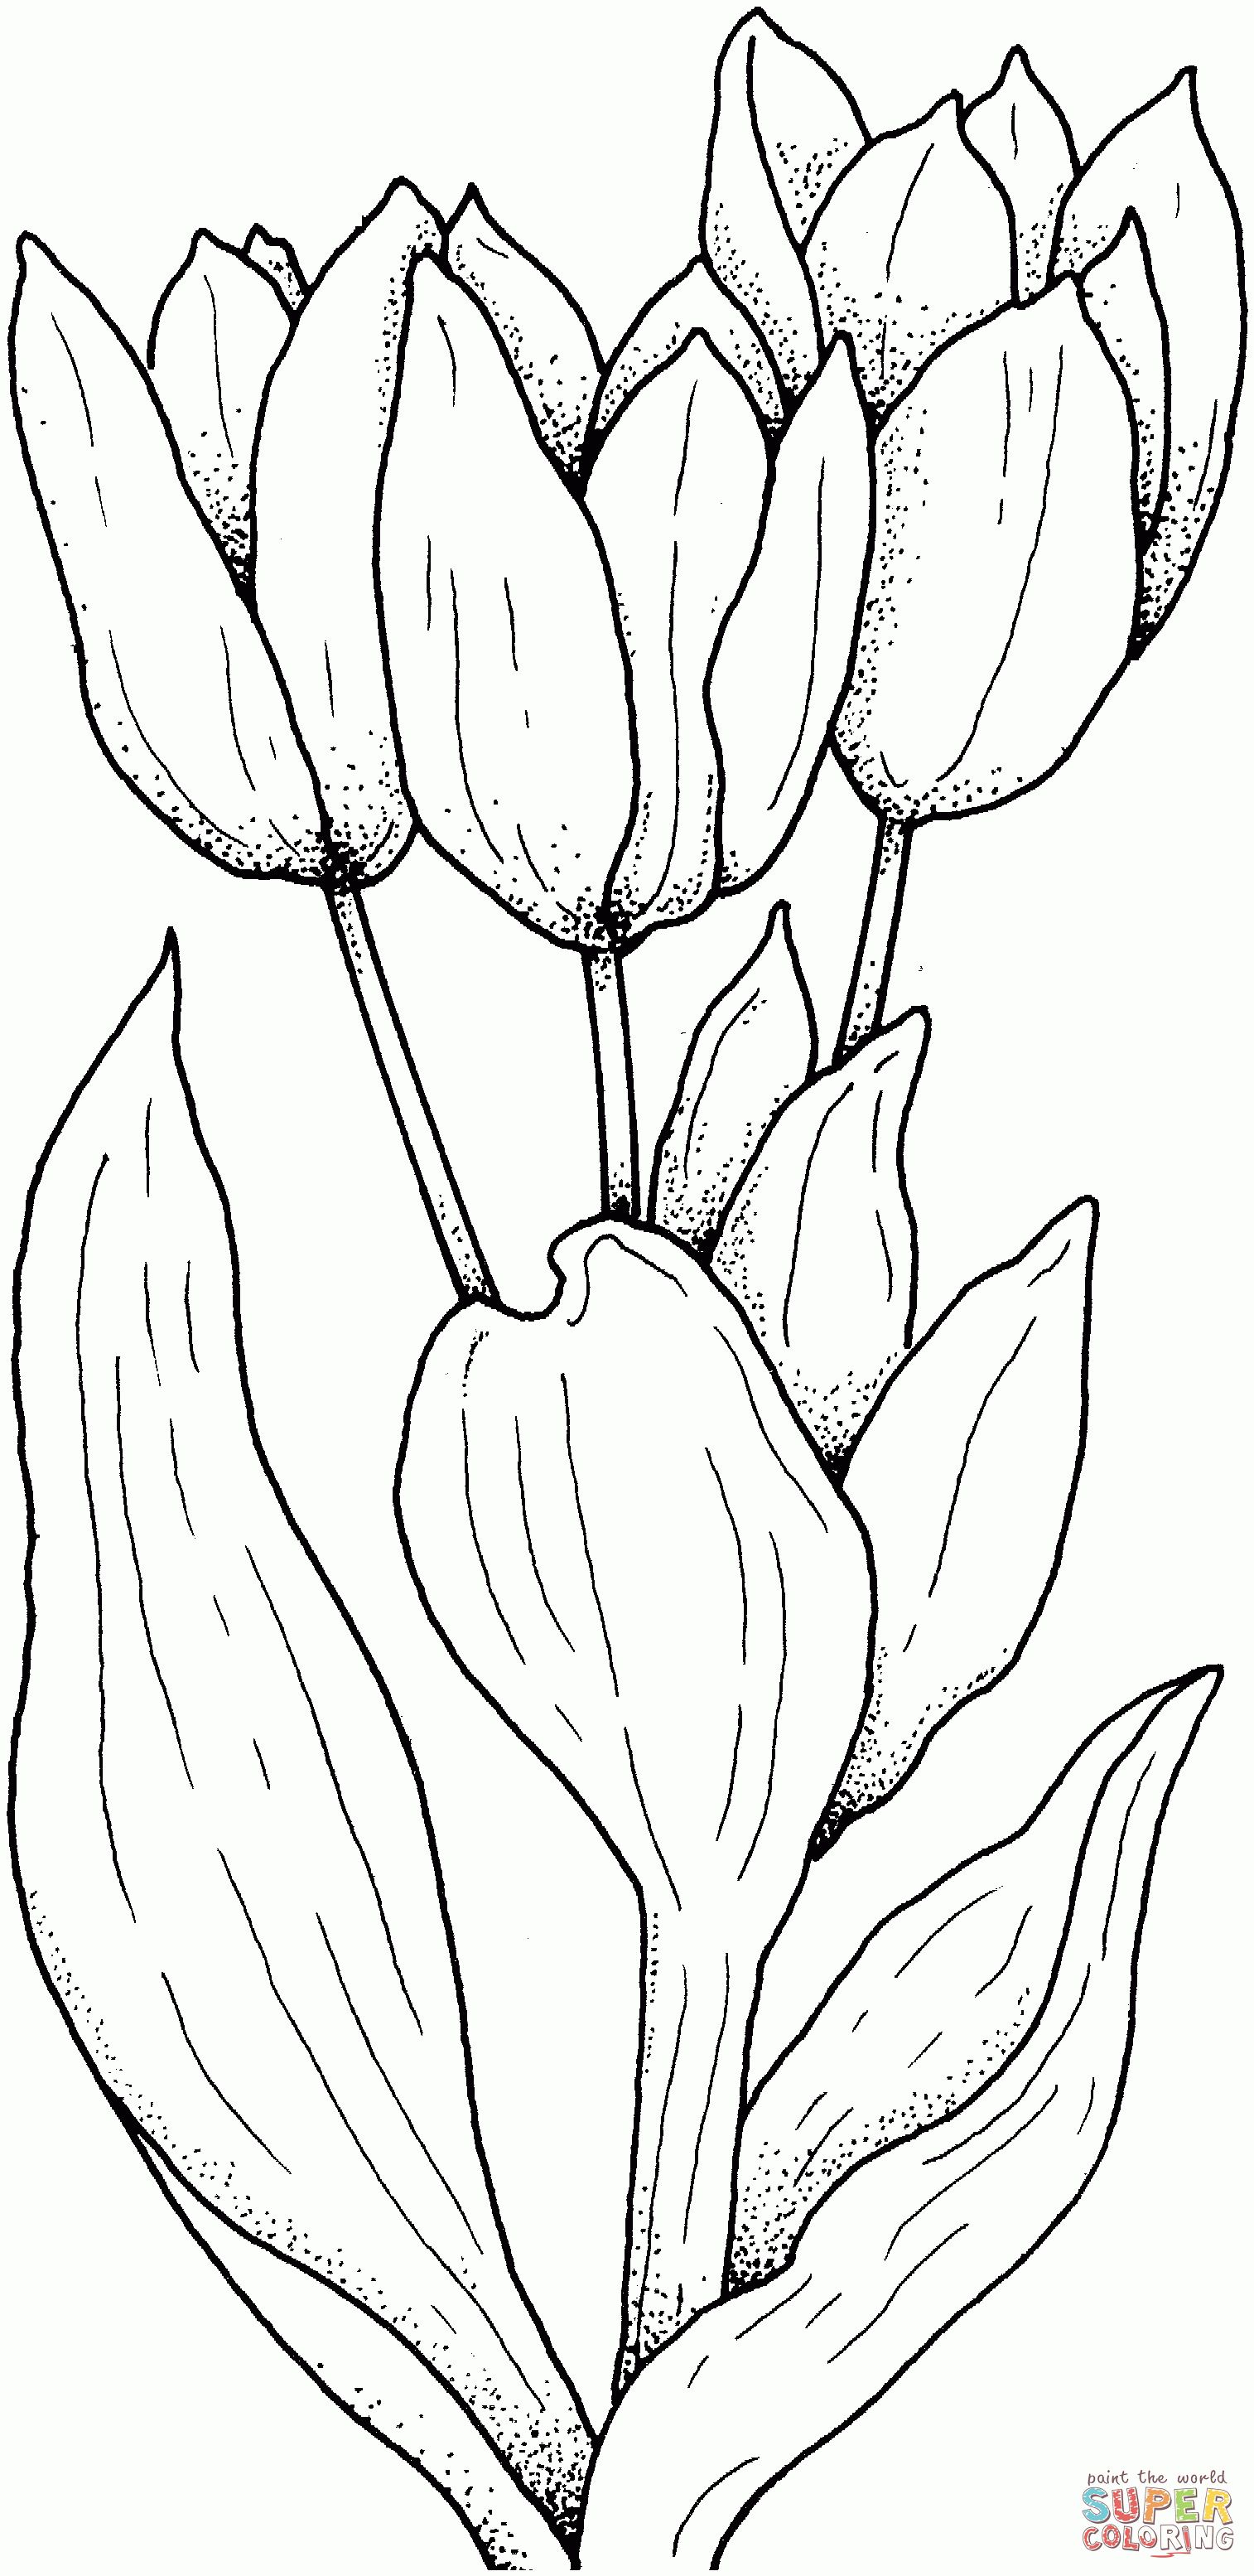 Tulips Flower Coloring Page | Free Printable Coloring Pages - Free Printable Tulip Coloring Pages